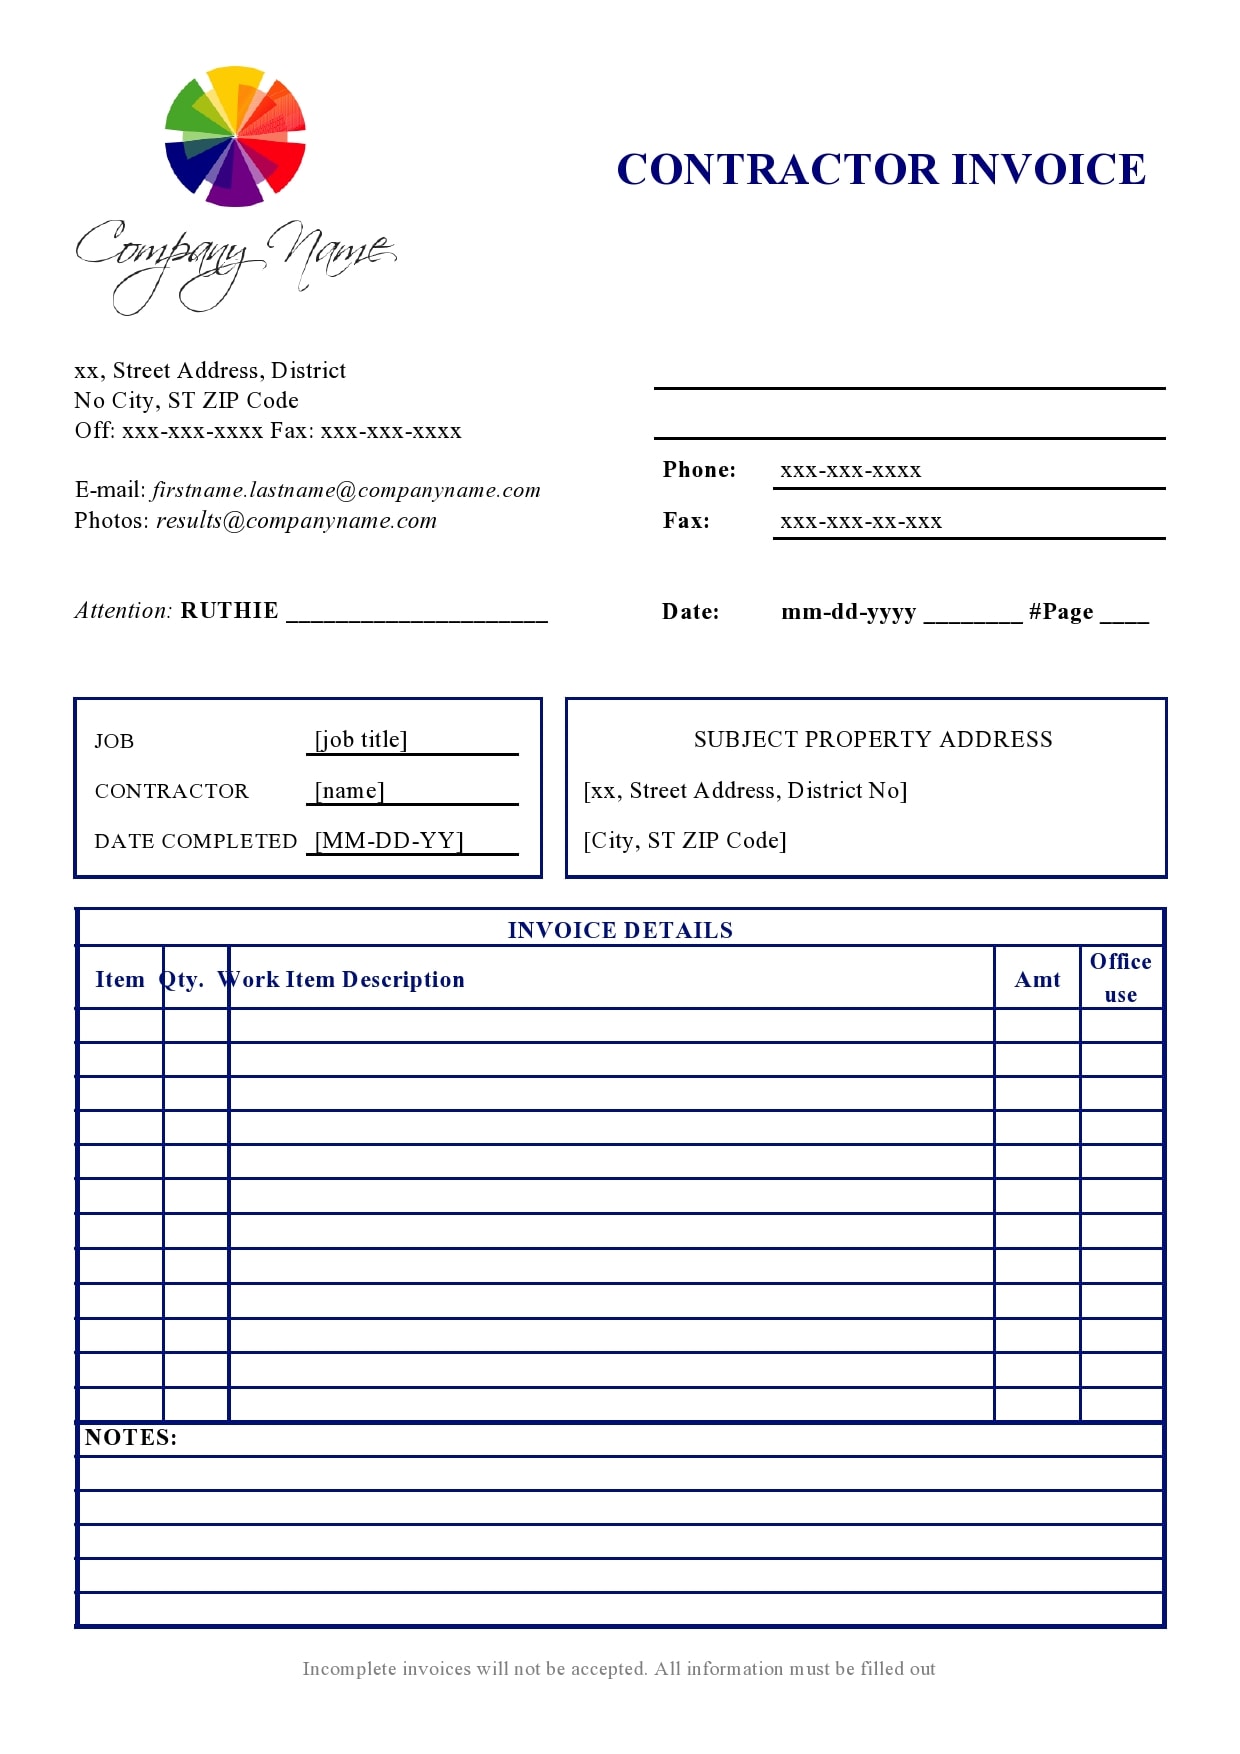 printable-contractor-invoice-forms-printable-world-holiday